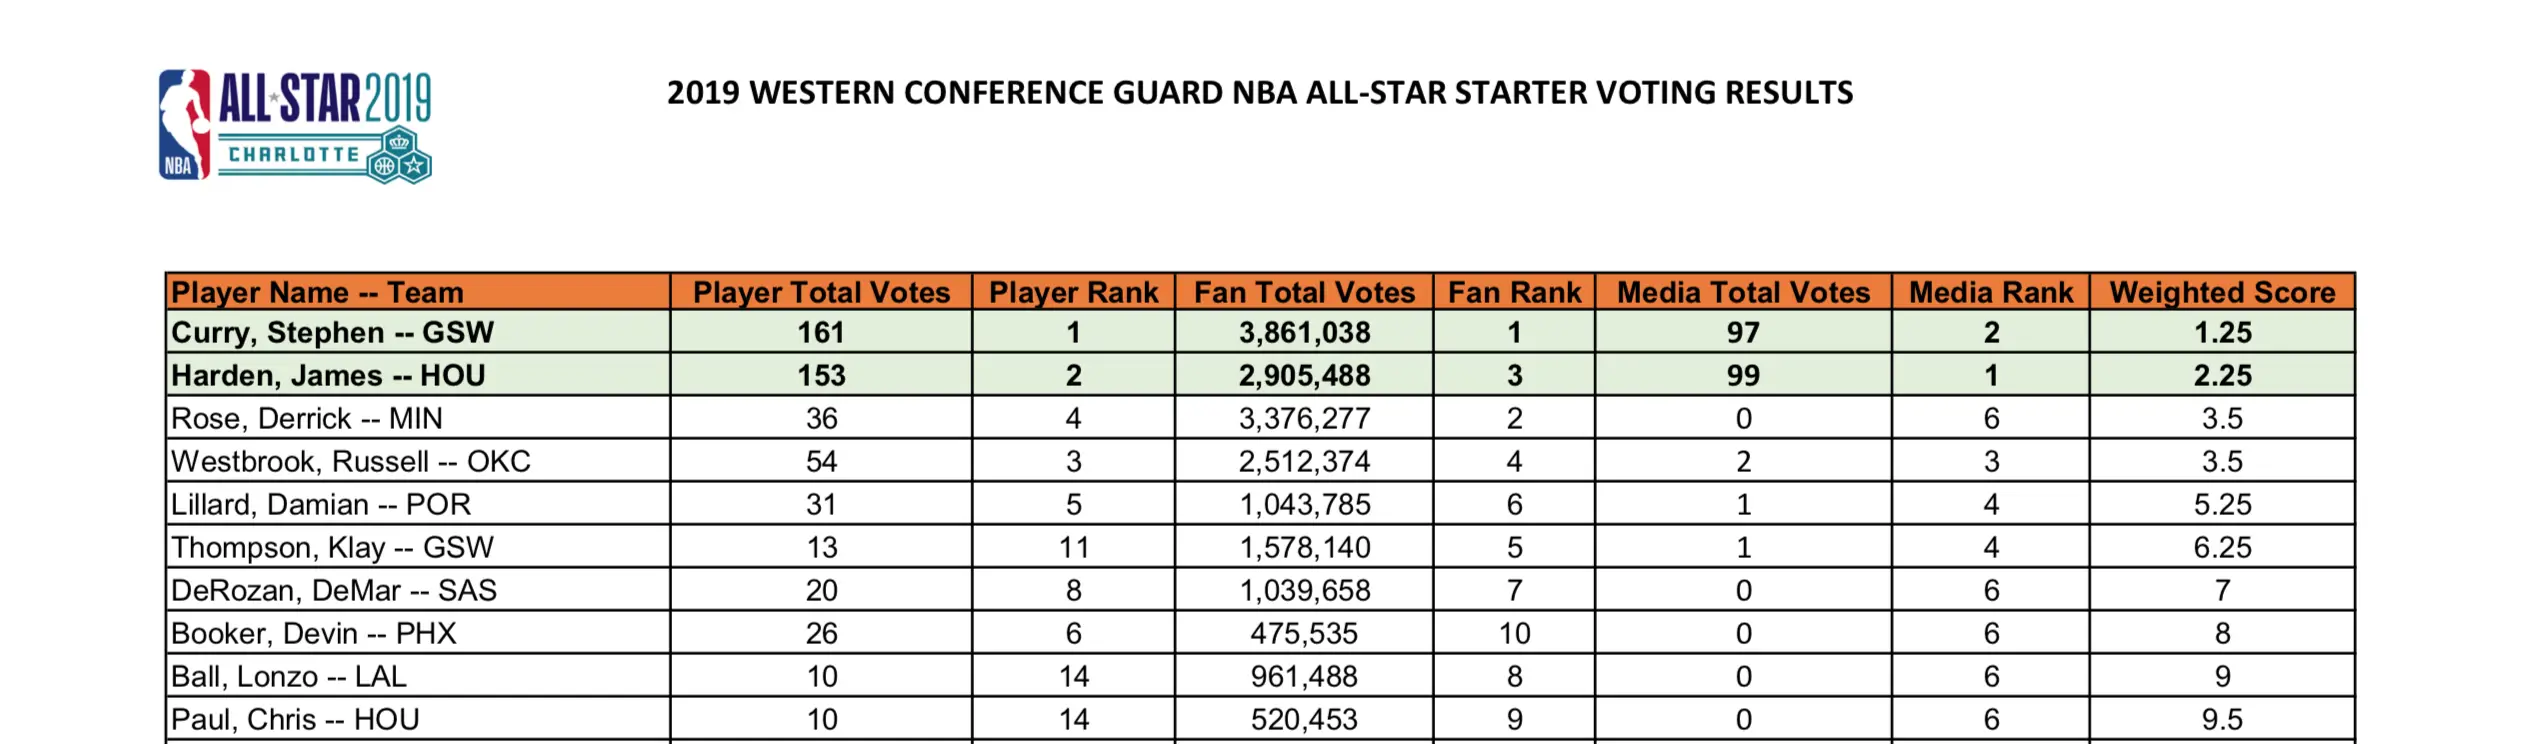 NBA All-Star Starter Voting Results